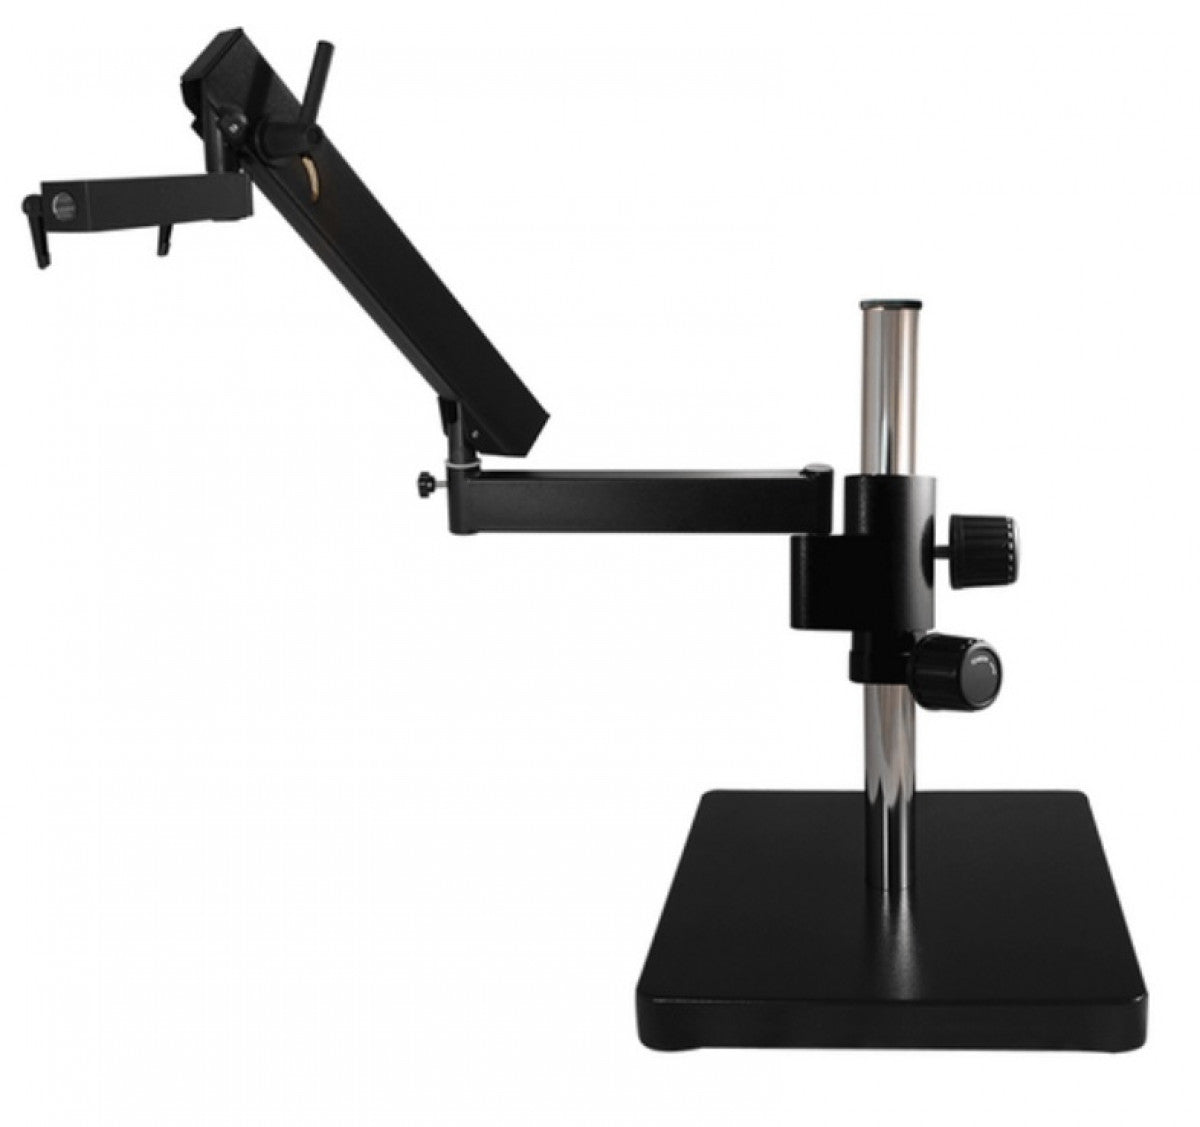 Flex Arm Stand for Omni 3, Inspex 3 - Table Base - microscopemarketplace